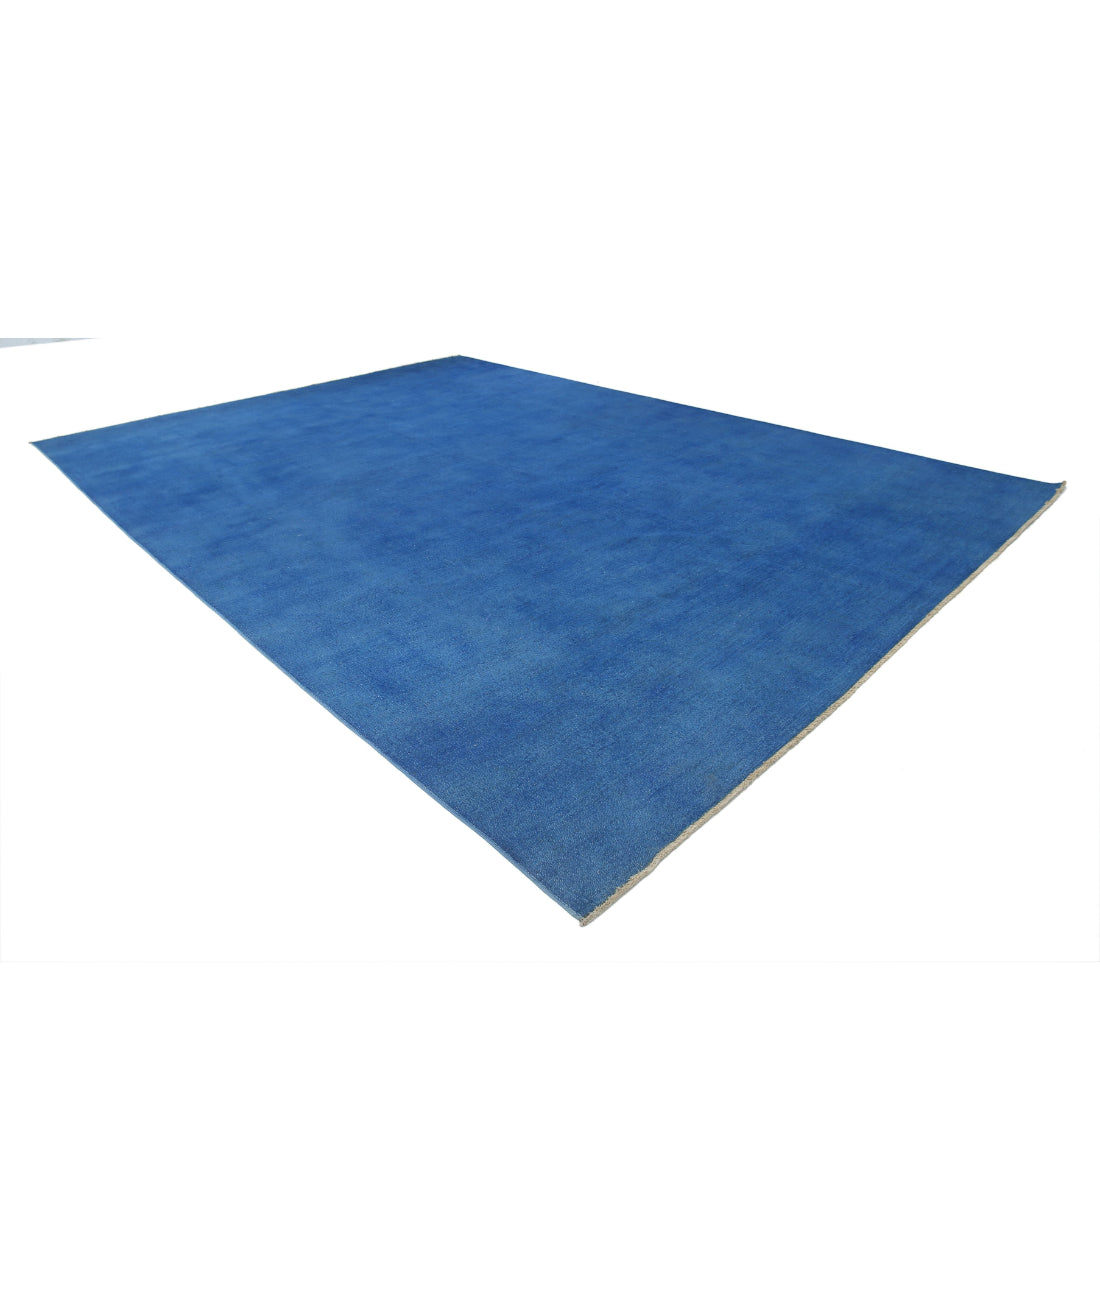 Hand Knotted Overdye Wool Rug - 11'7'' x 16'0'' 11'7'' x 16'0'' (348 X 480) / Blue / Blue